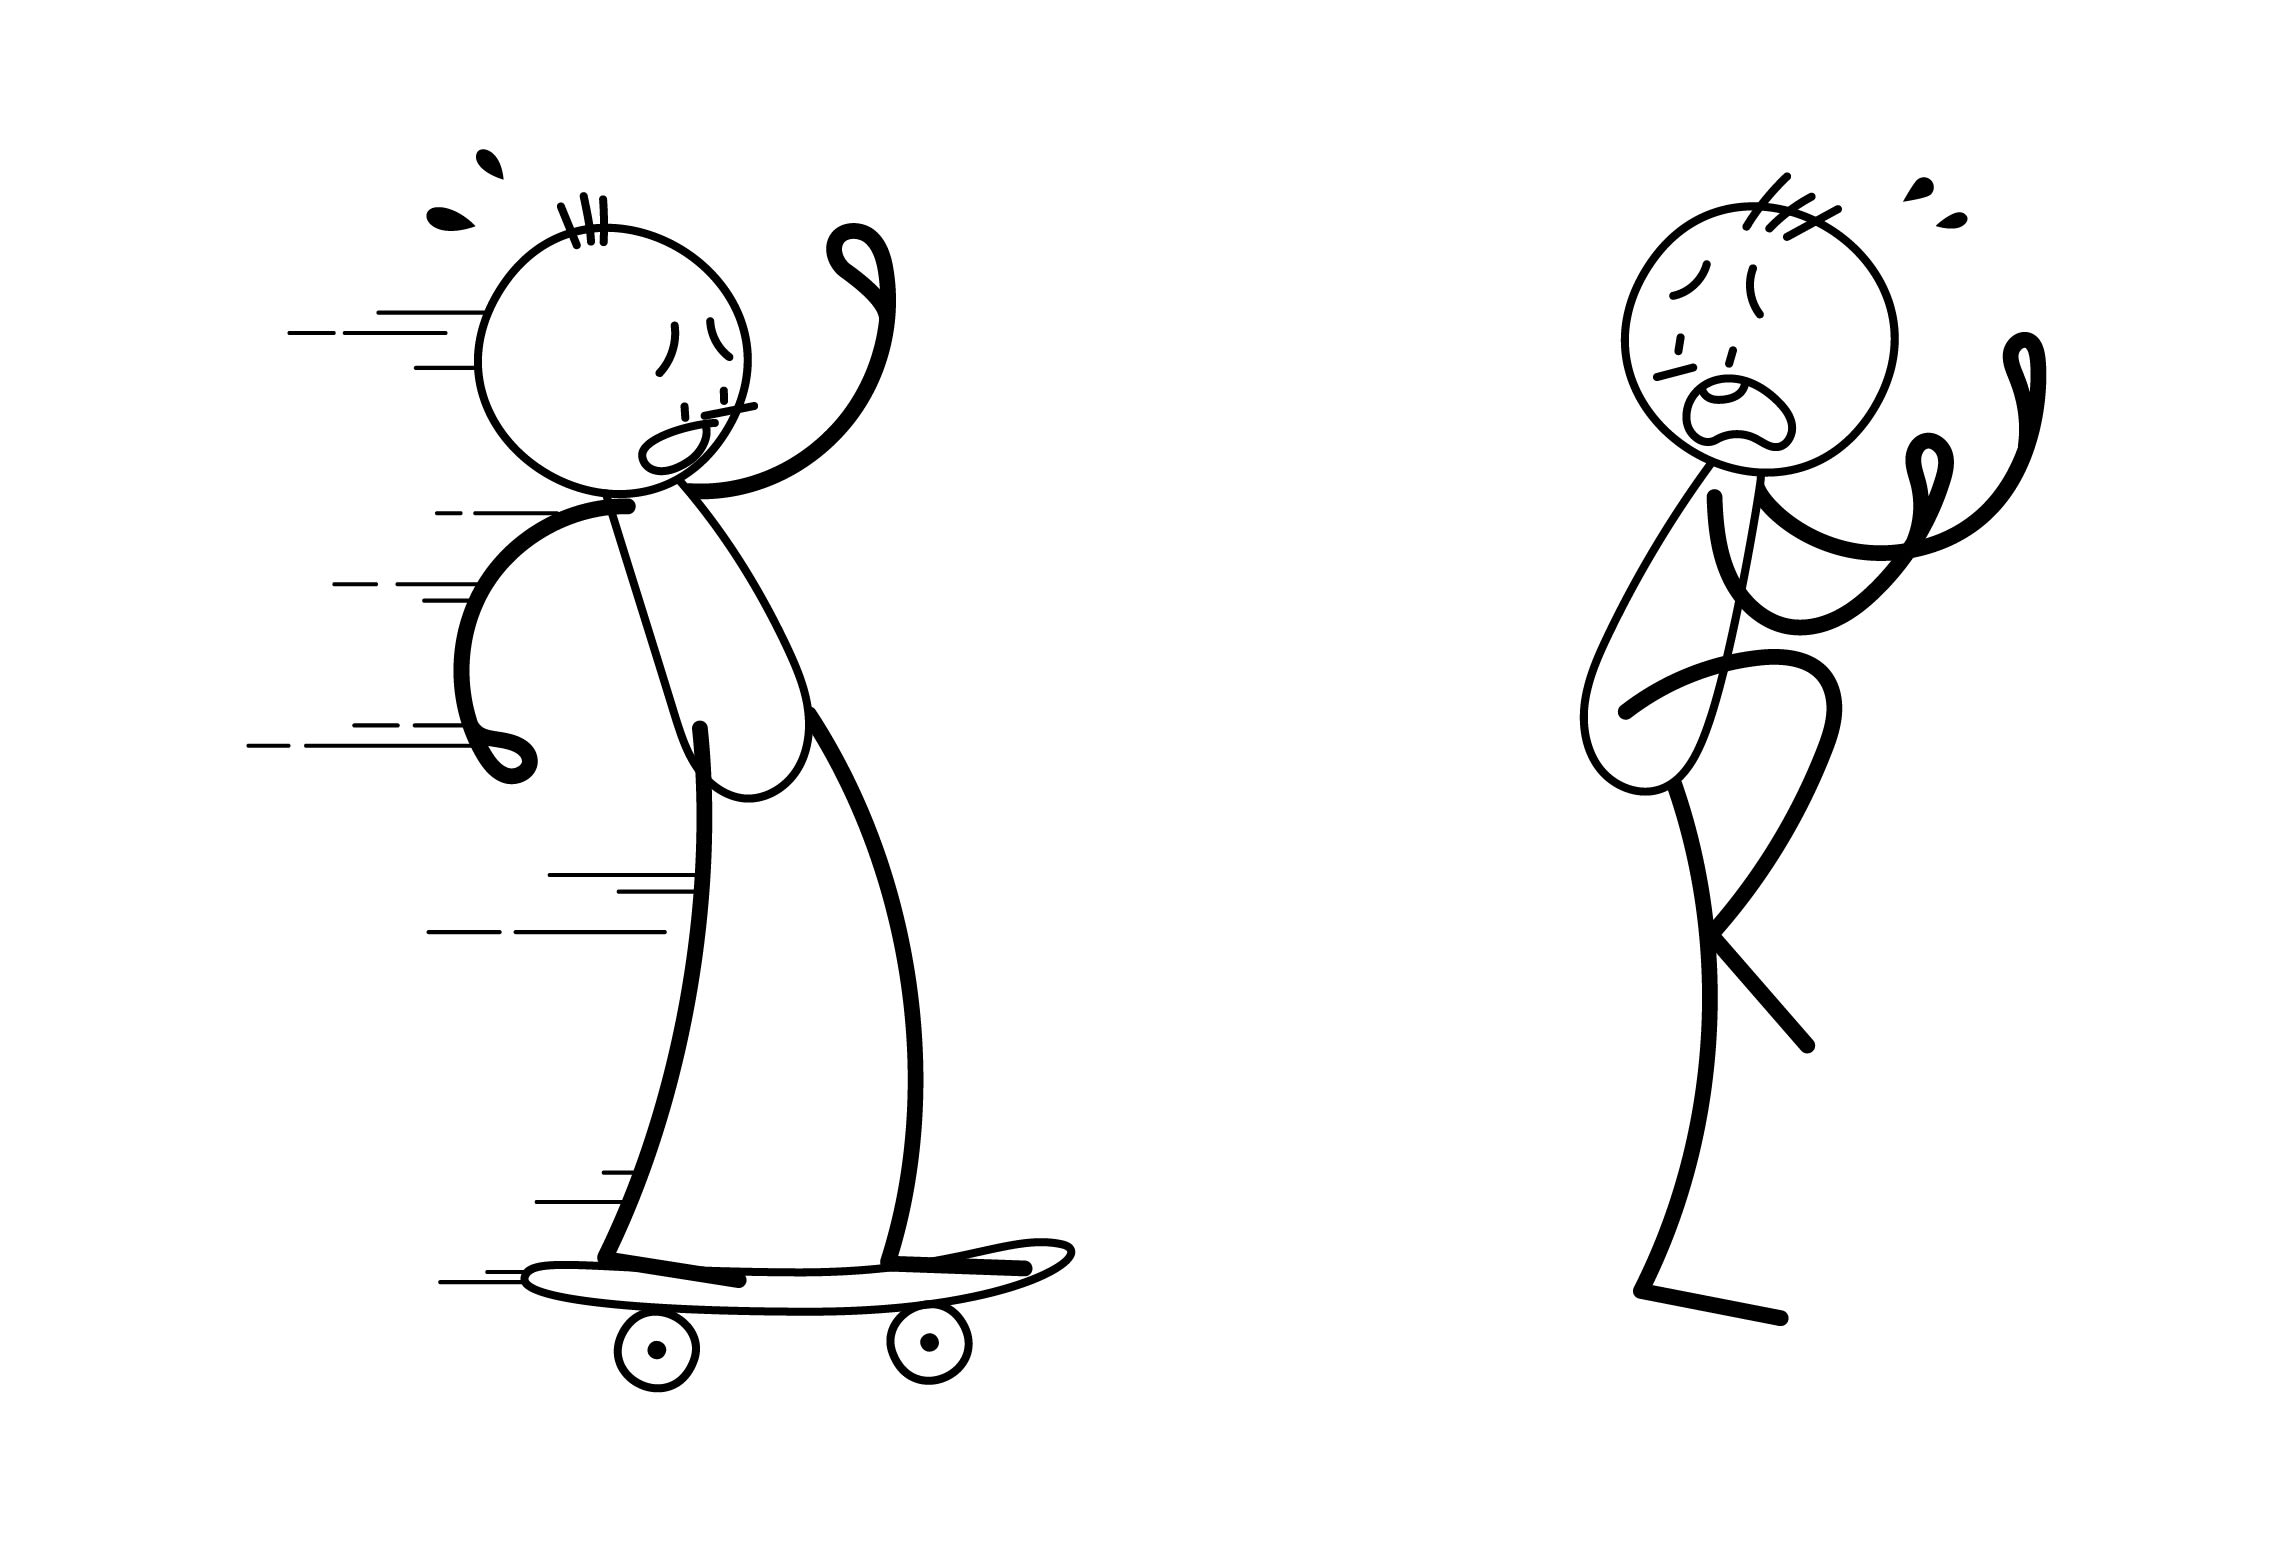 Stick figures, with style! Basic design